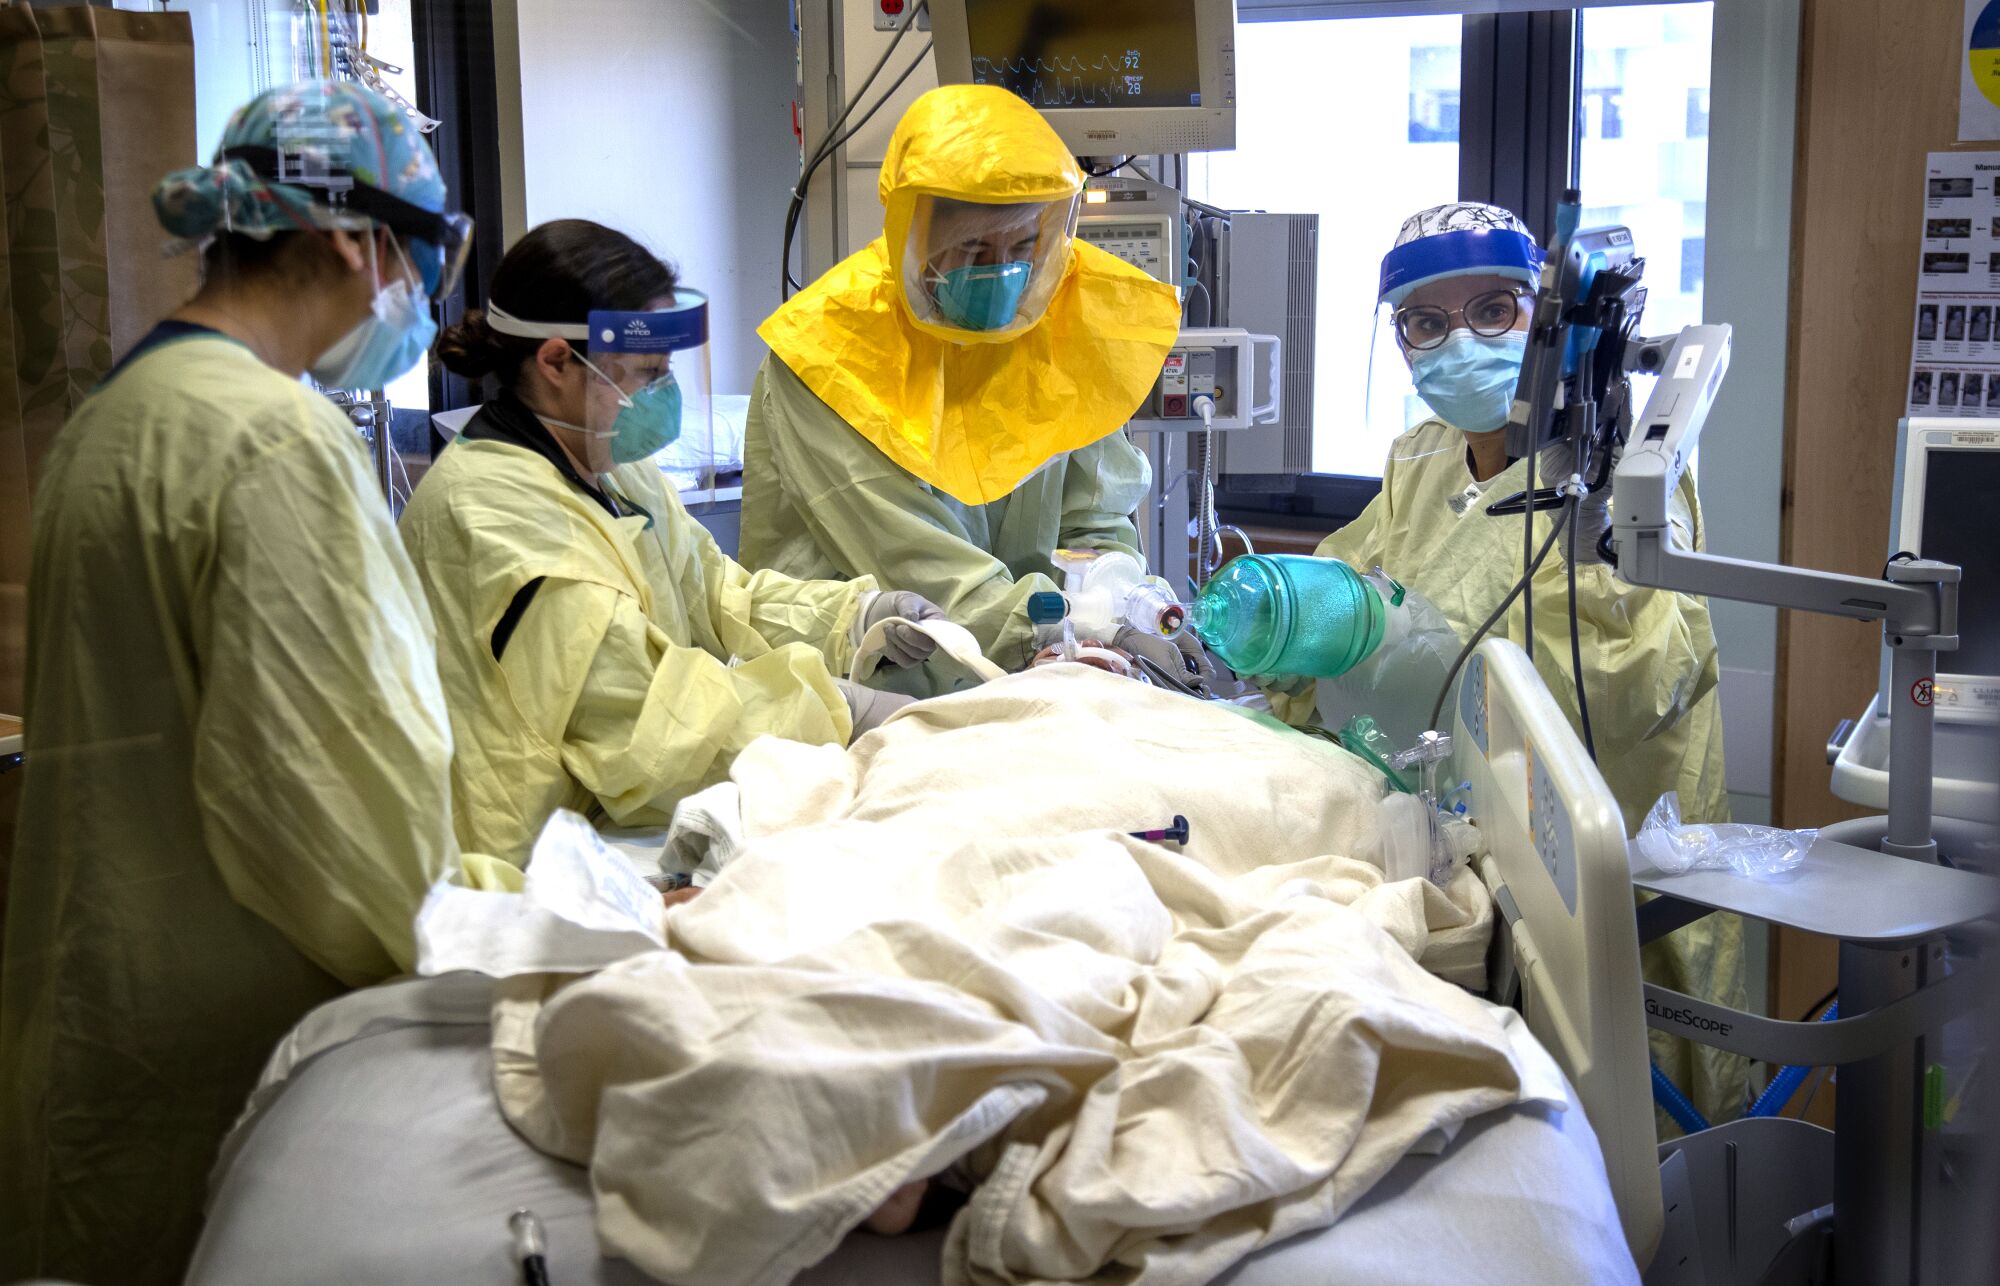 Hospital staff in protective masks, gowns and face shields work on a person lying on a hospital bed.